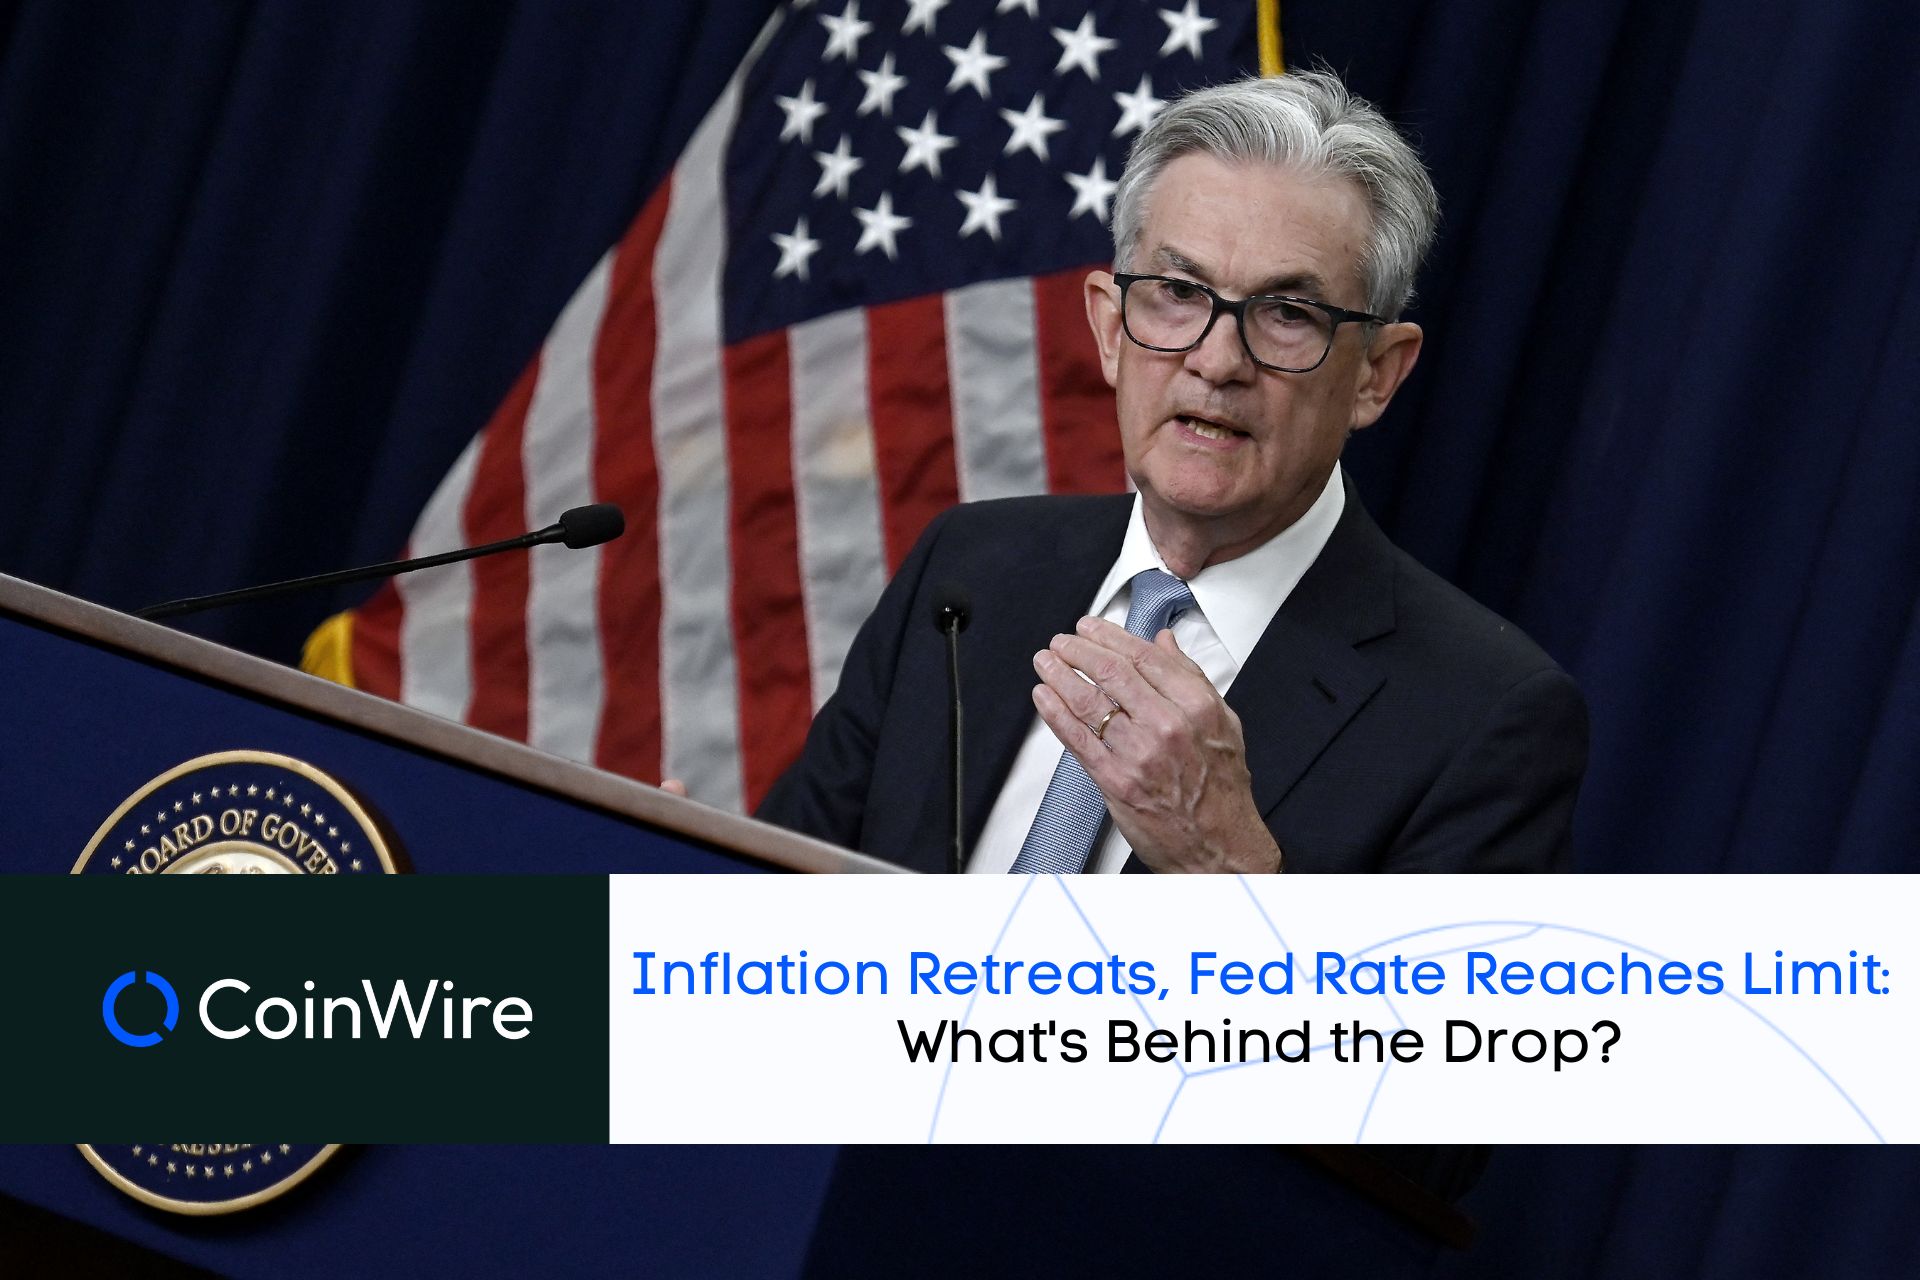 Inflation Retreats, Fed Rate Reaches Limit: What'S Behind The Drop?